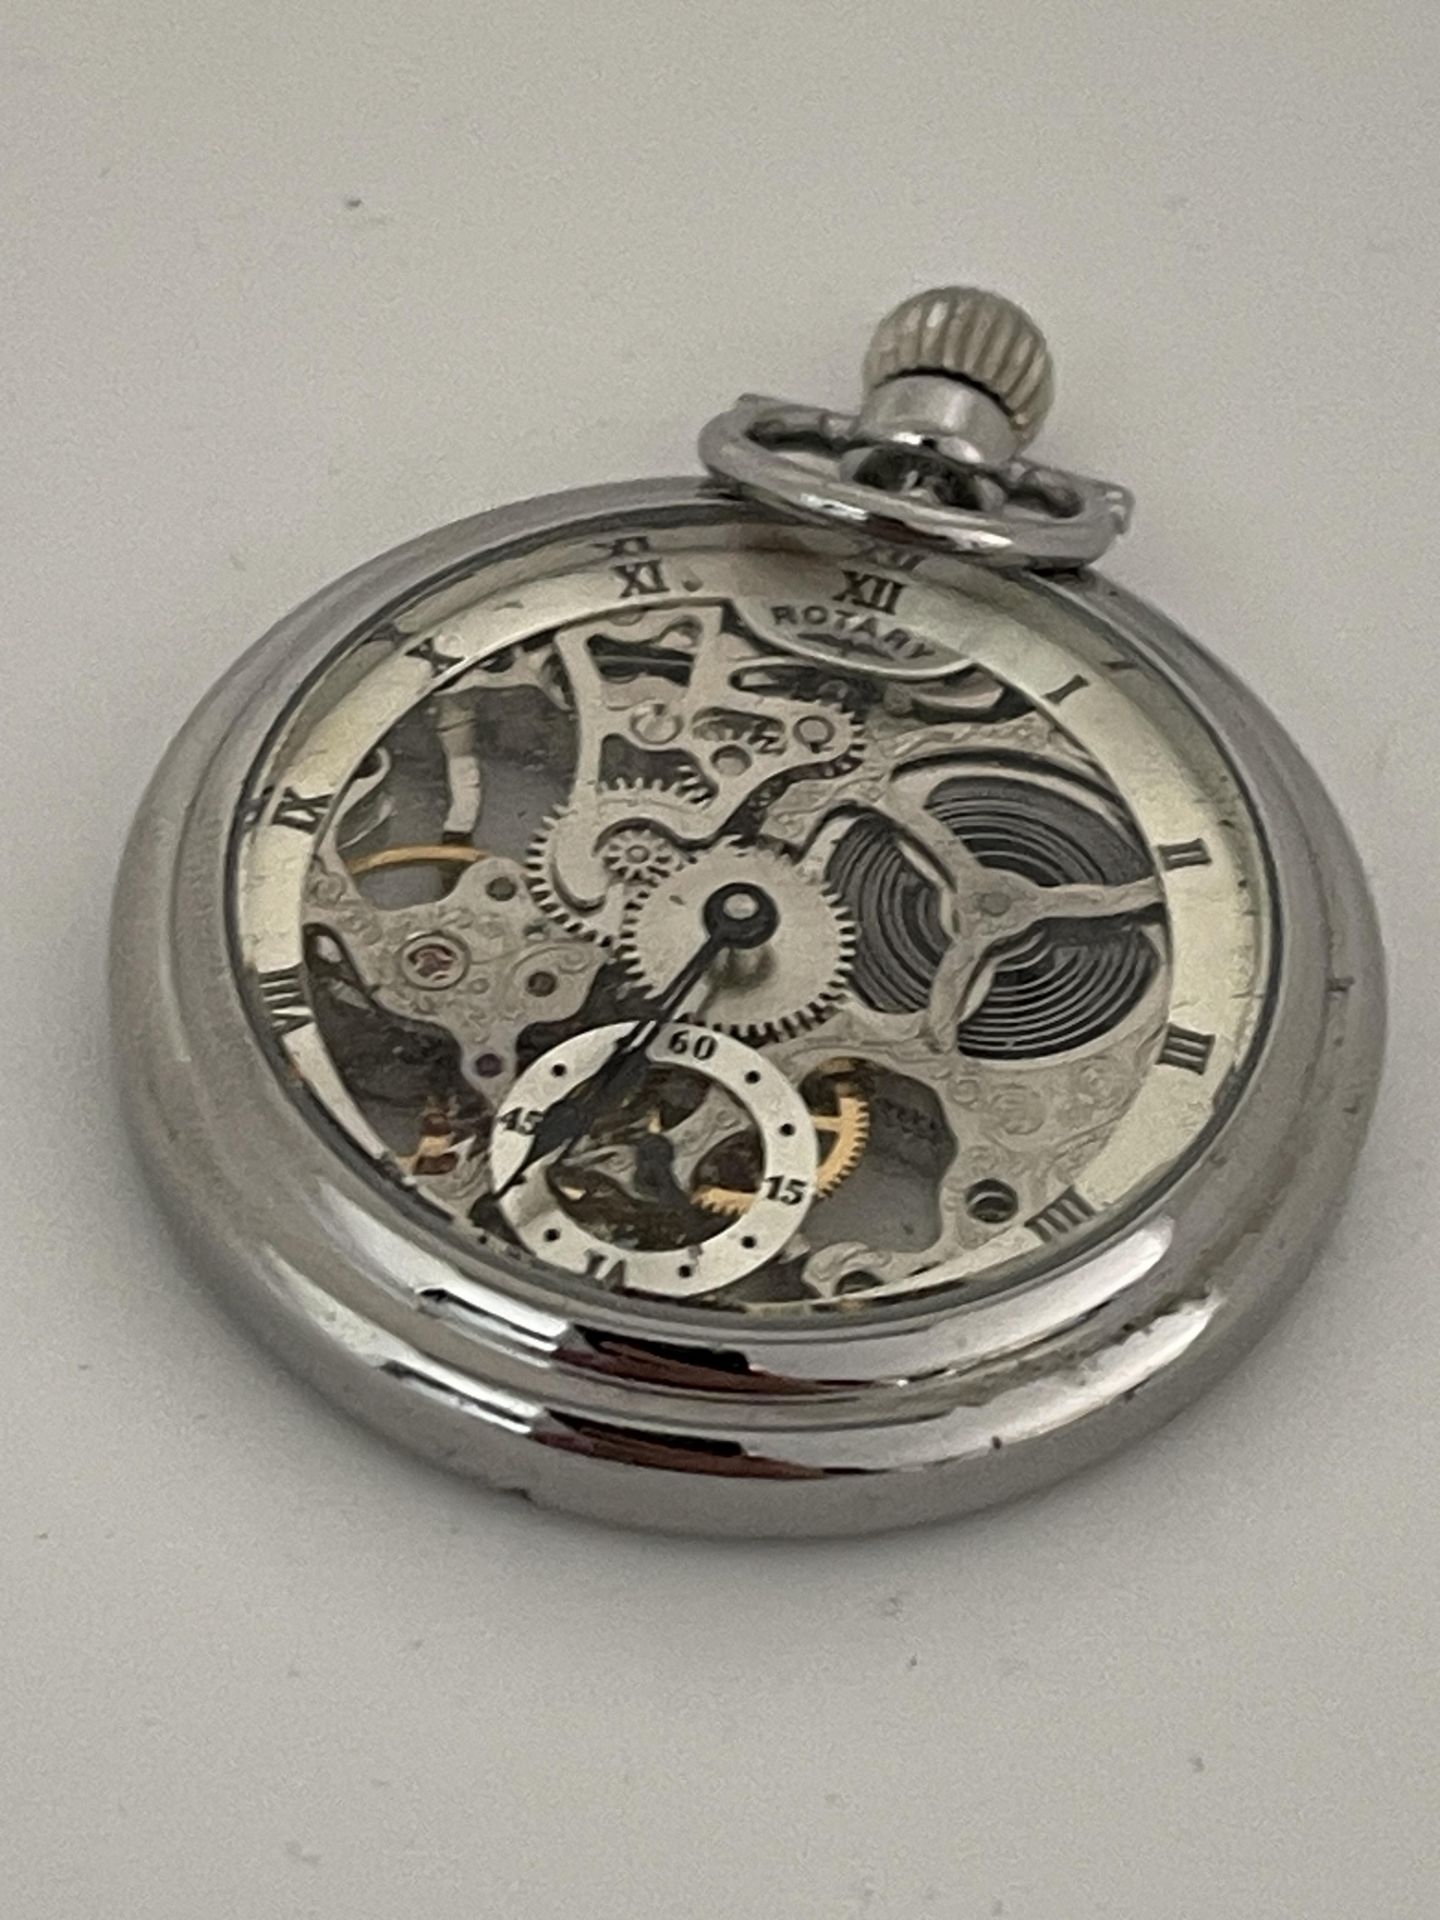 Rotary pocket watch - Image 2 of 4